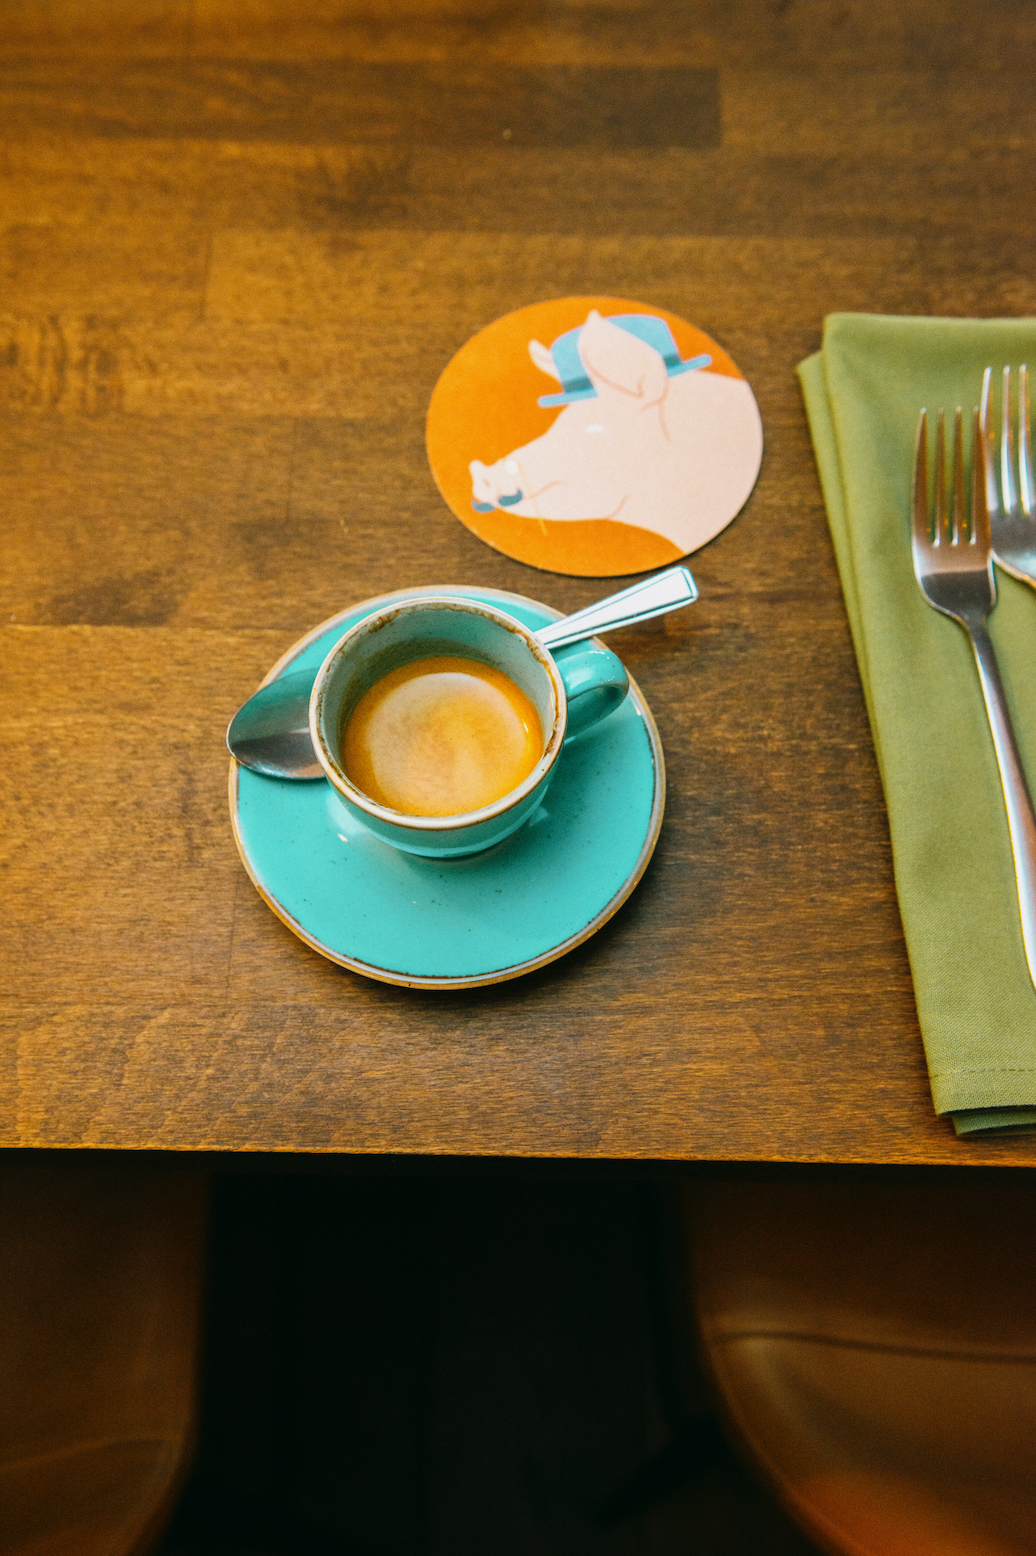 Teal mug and saucer, filled with Missing Bean wholesale coffee, next to a Three Little Pigs Wallingford beermat on a wooden table with two forks on a green napkin